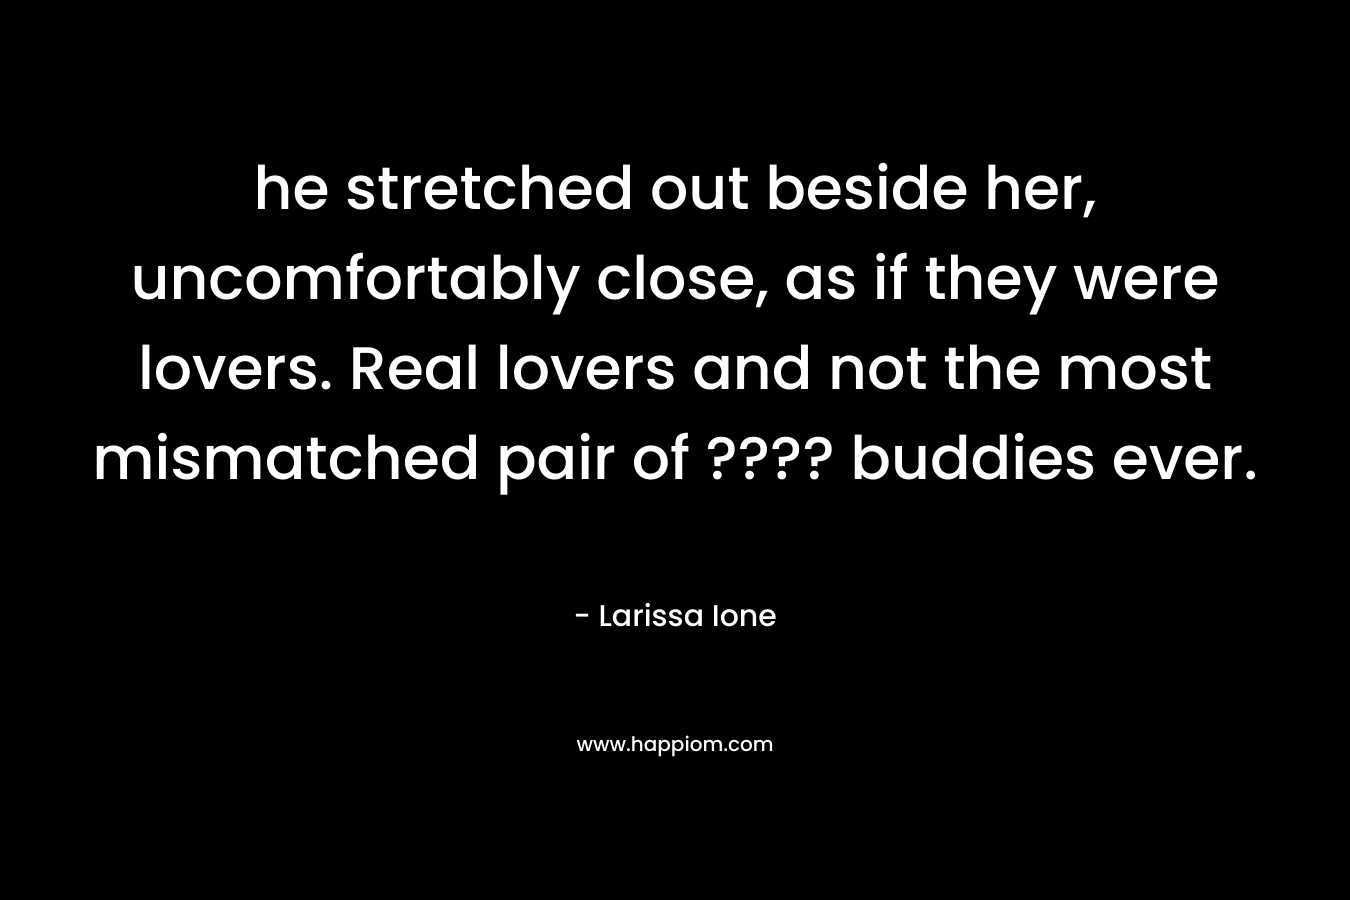 he stretched out beside her, uncomfortably close, as if they were lovers. Real lovers and not the most mismatched pair of ???? buddies ever.